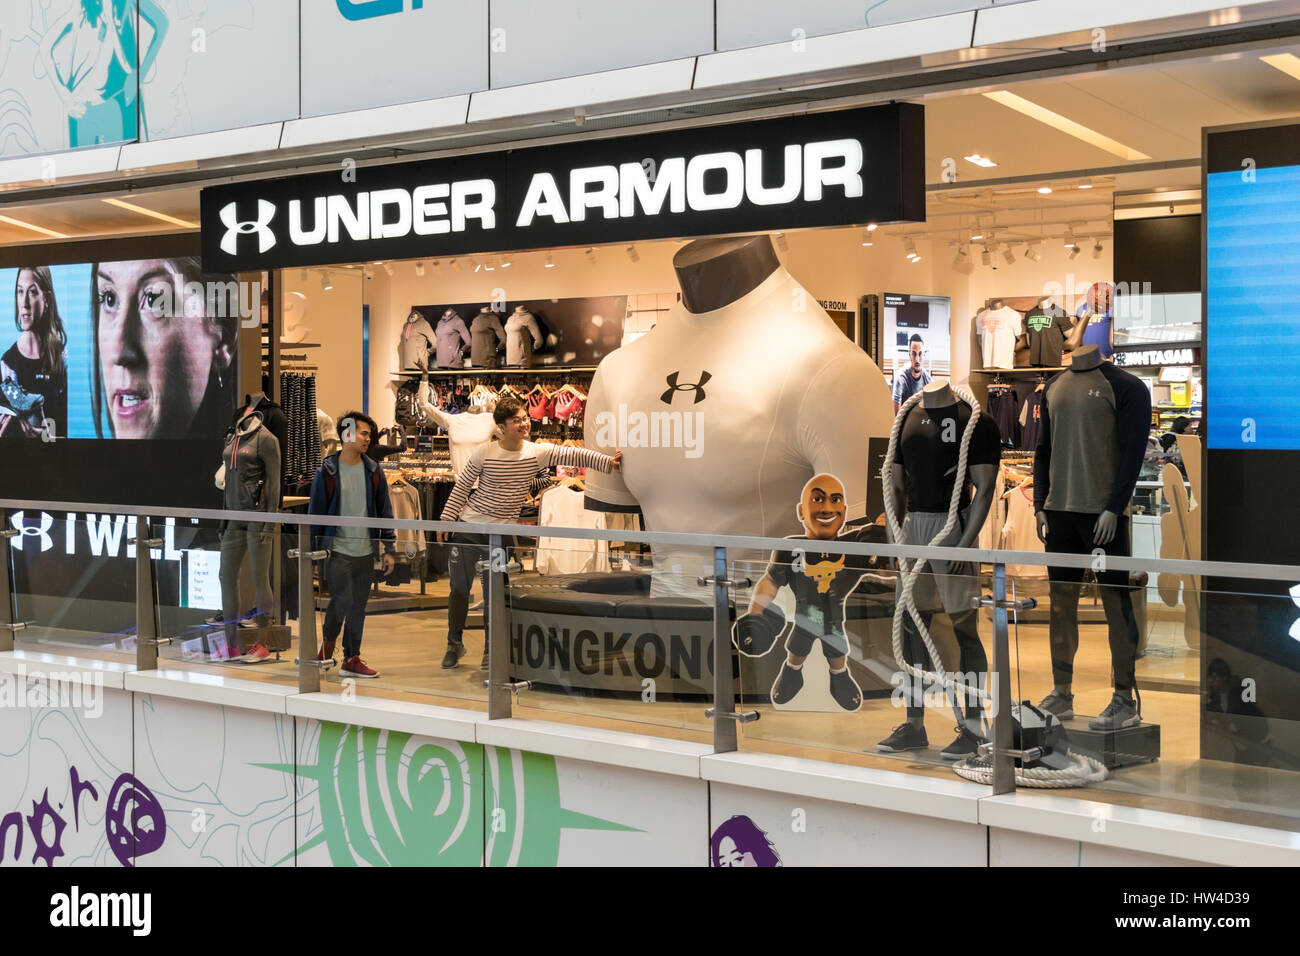 Underarmour High Resolution Stock Photography and Images - Alamy